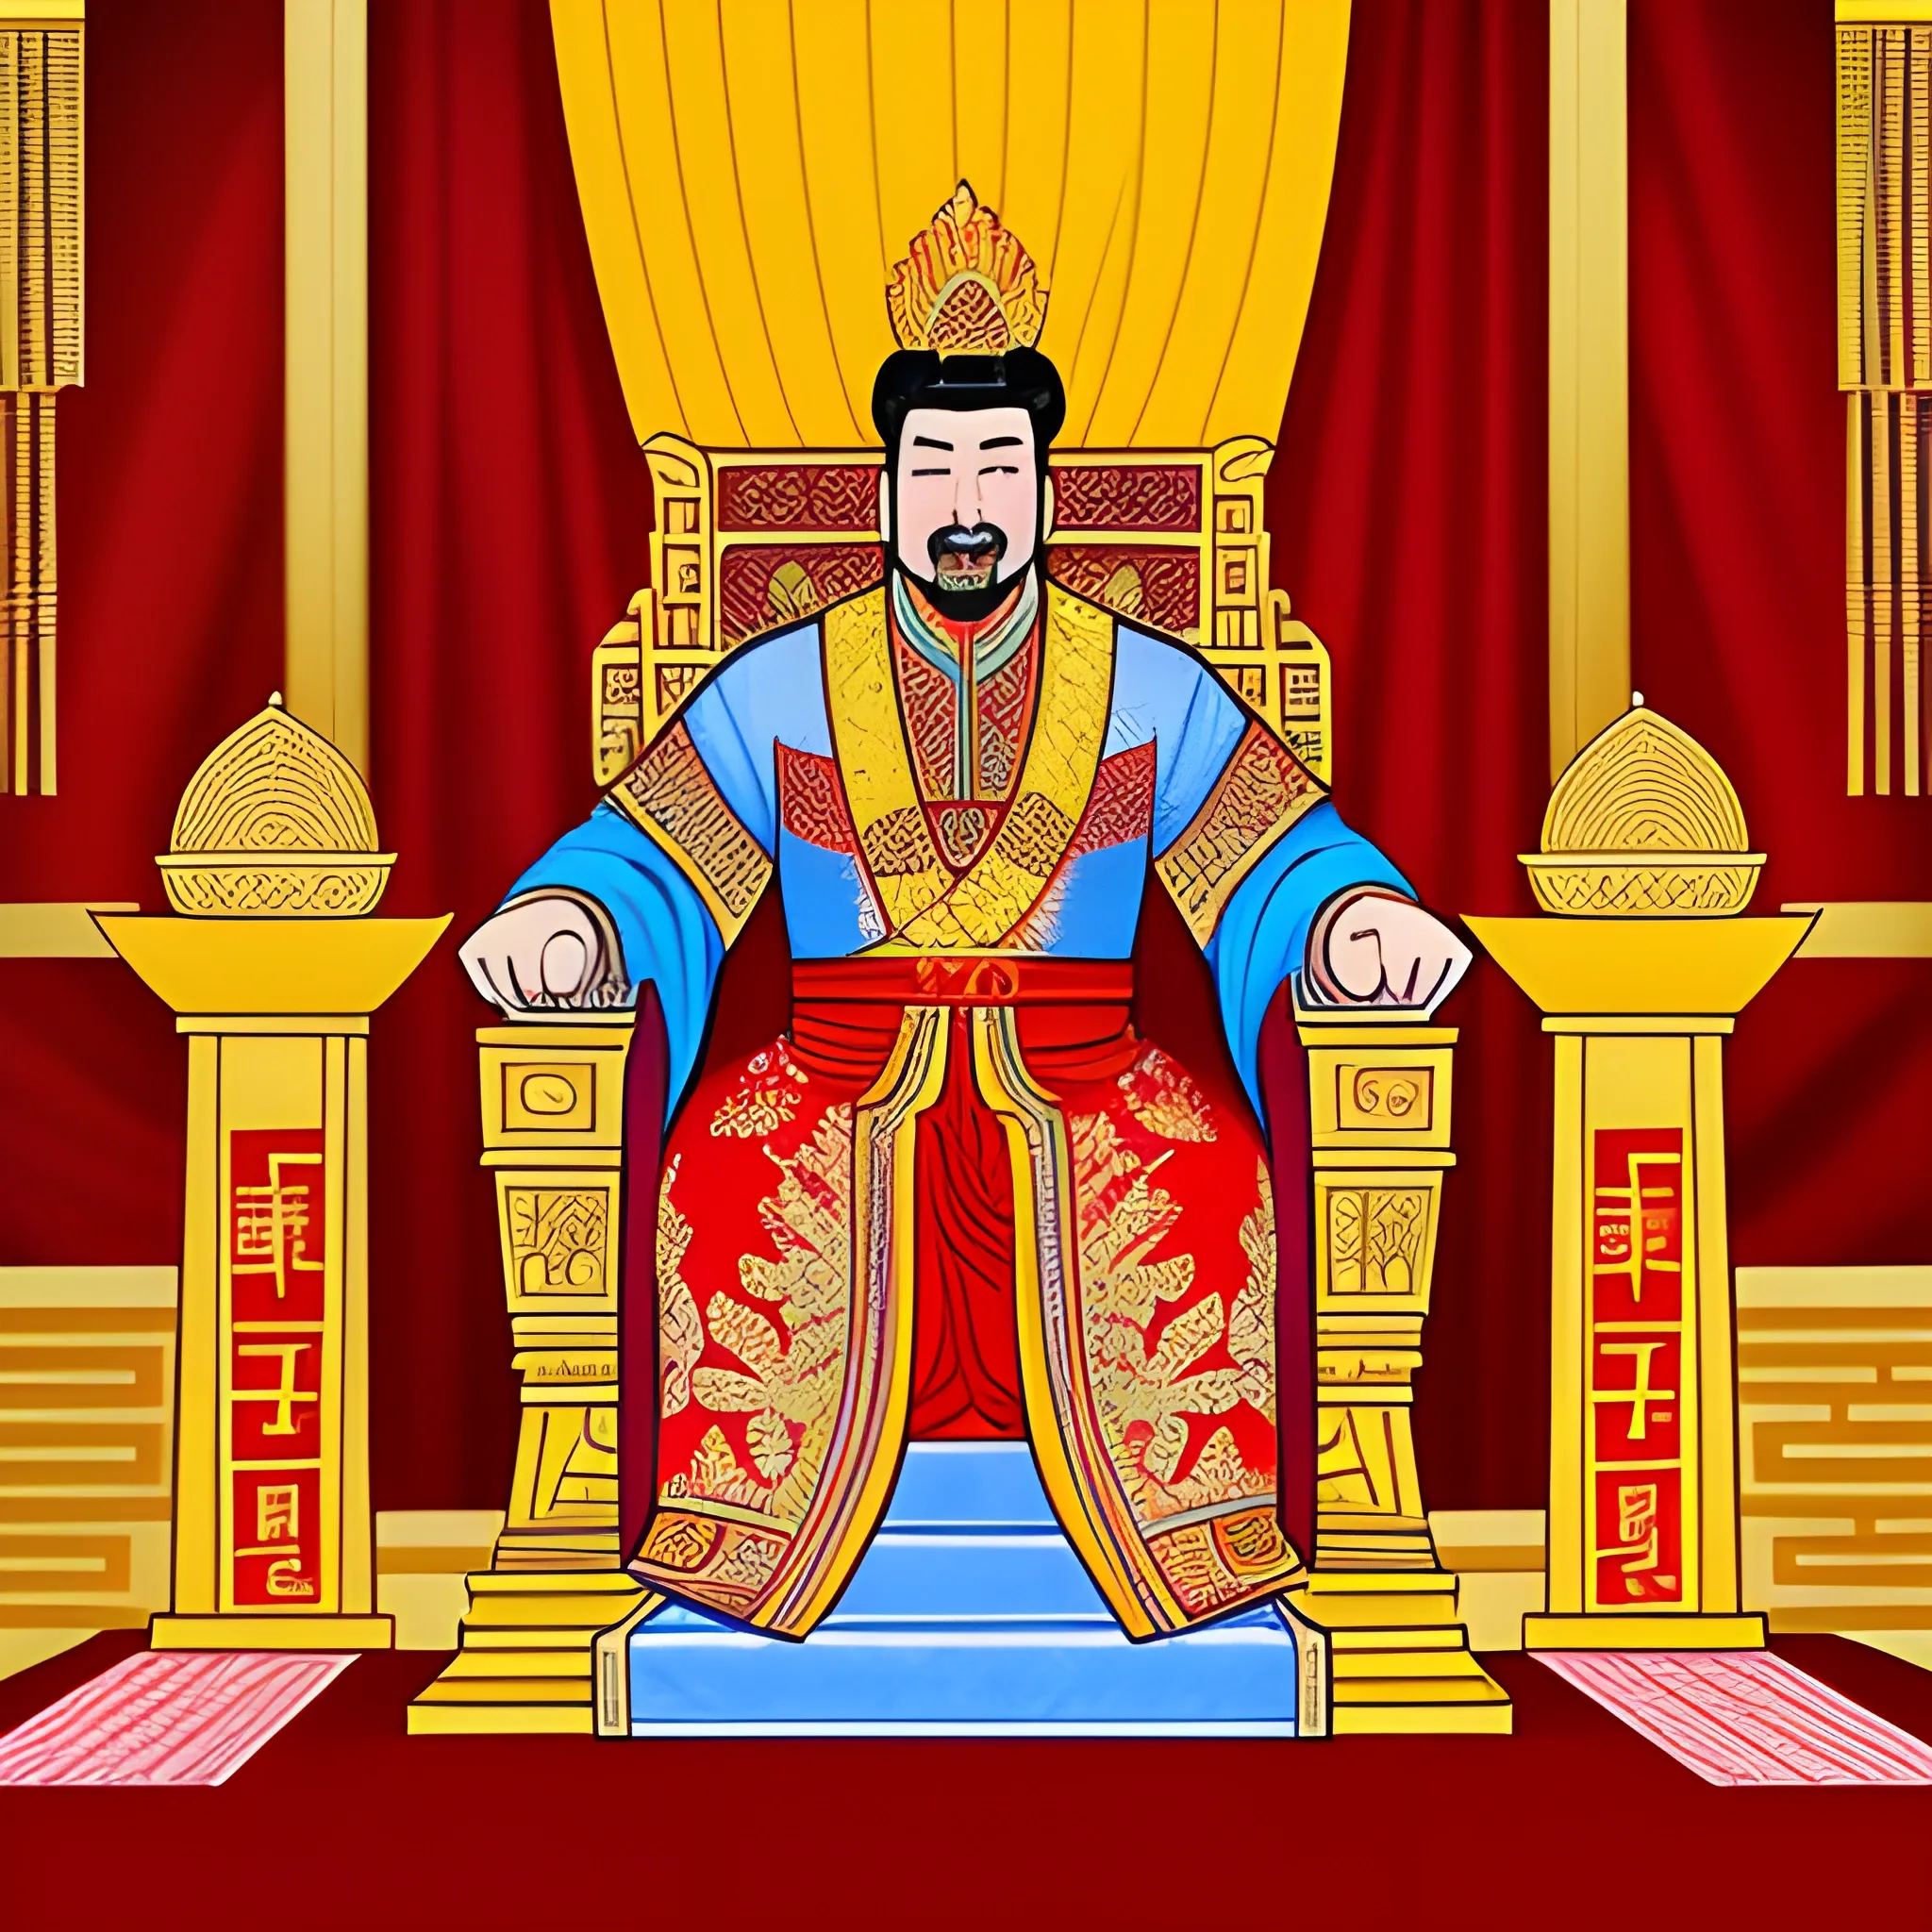 young Chinese king coronation ceremony

, Cartoon